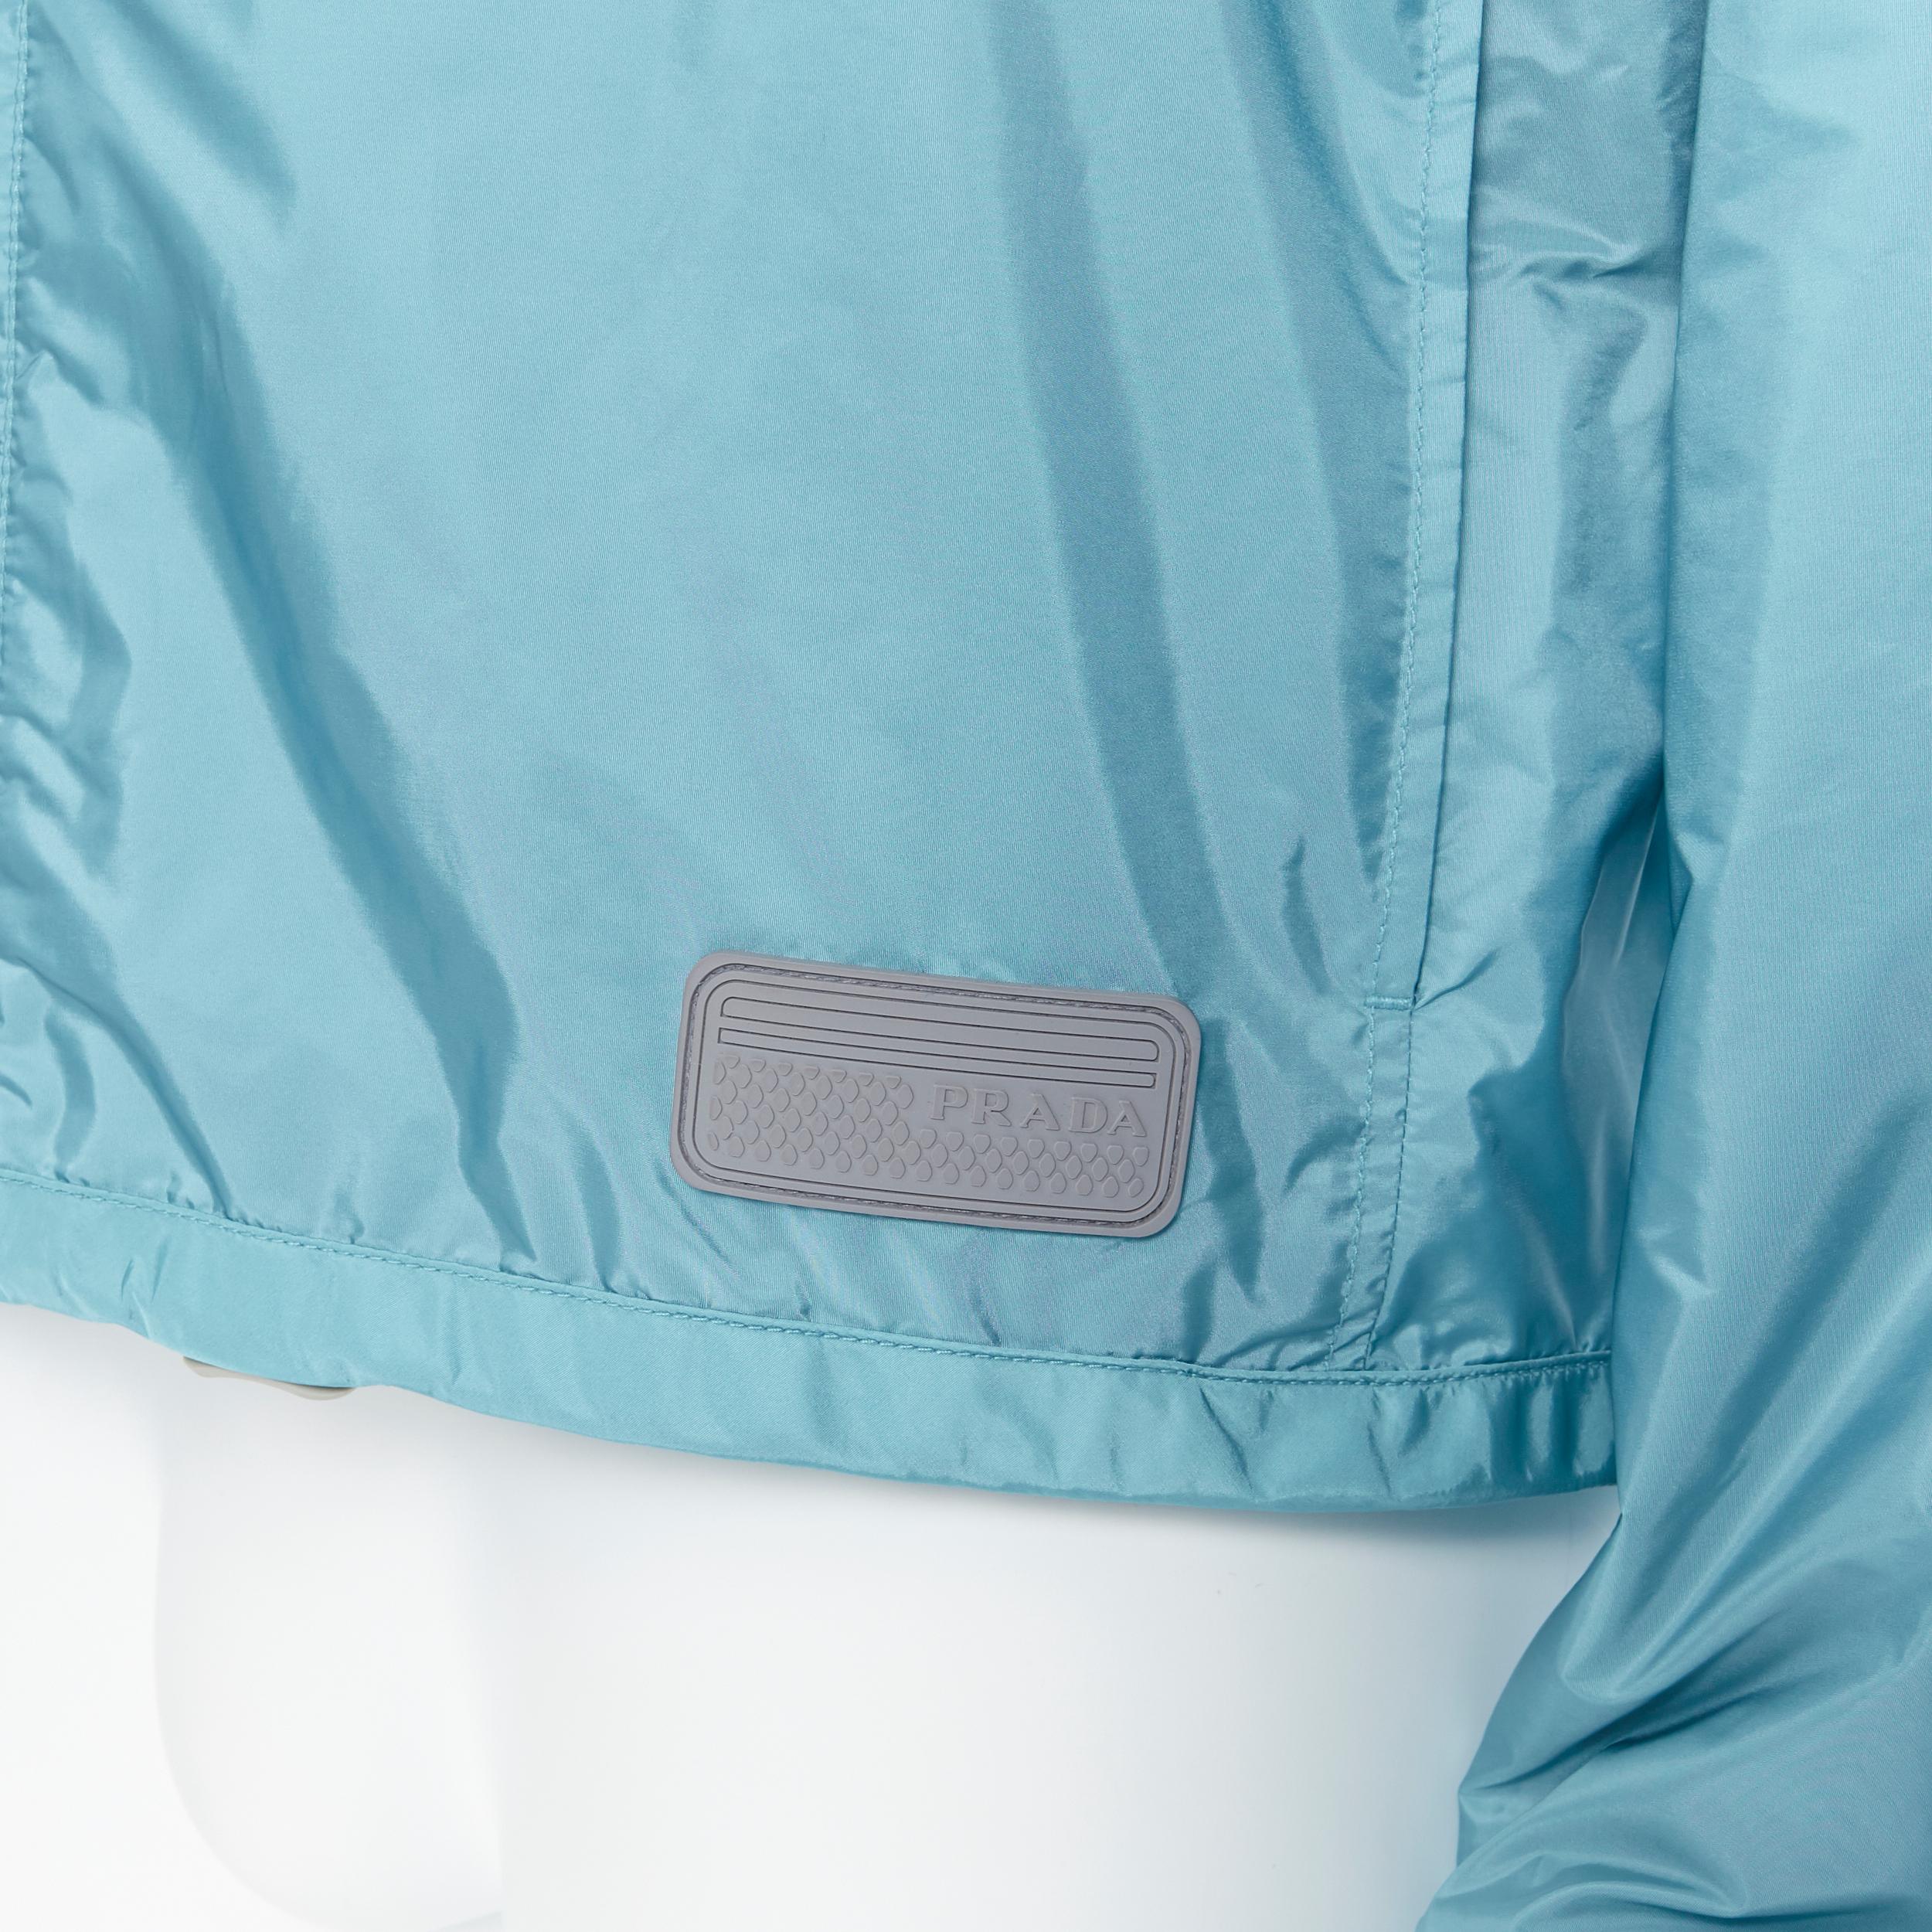 new PRADA Nylon teal blue rubber logo badge zip front light shell jacket IT50 
Reference: TGAS/A05739 
Brand: Prada 
Designer: Miuccia Prada 
Collection: 2017 
Material: Nylon 
Color: Blue 
Pattern: Solid 
Closure: Zip 
Extra Detail: Concealed